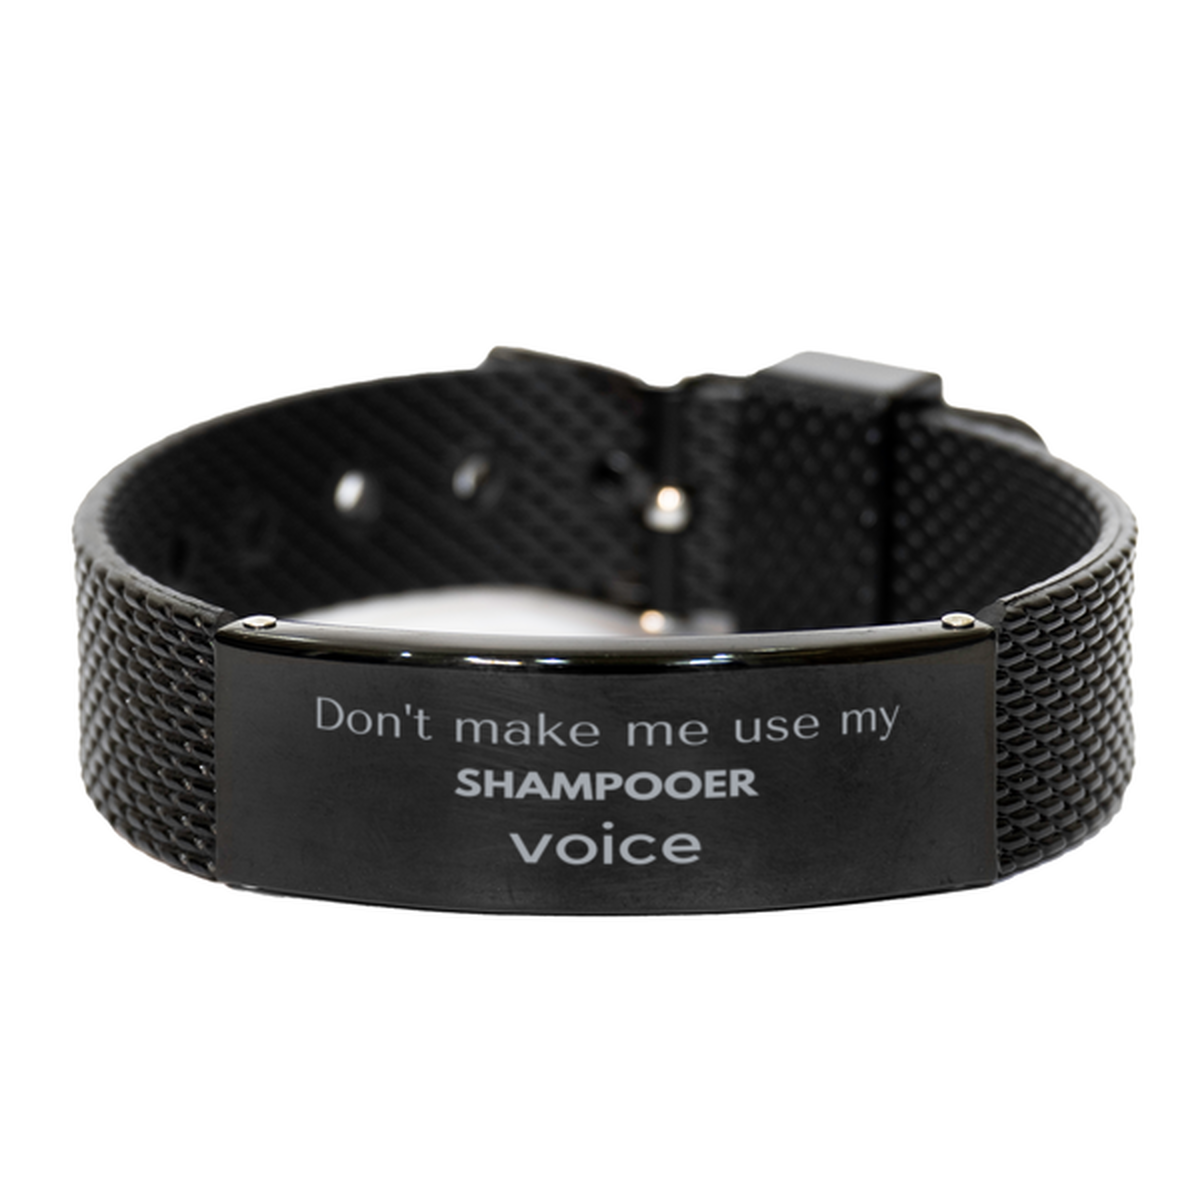 Don't make me use my Shampooer voice, Sarcasm Shampooer Gifts, Christmas Shampooer Black Shark Mesh Bracelet Birthday Unique Gifts For Shampooer Coworkers, Men, Women, Colleague, Friends